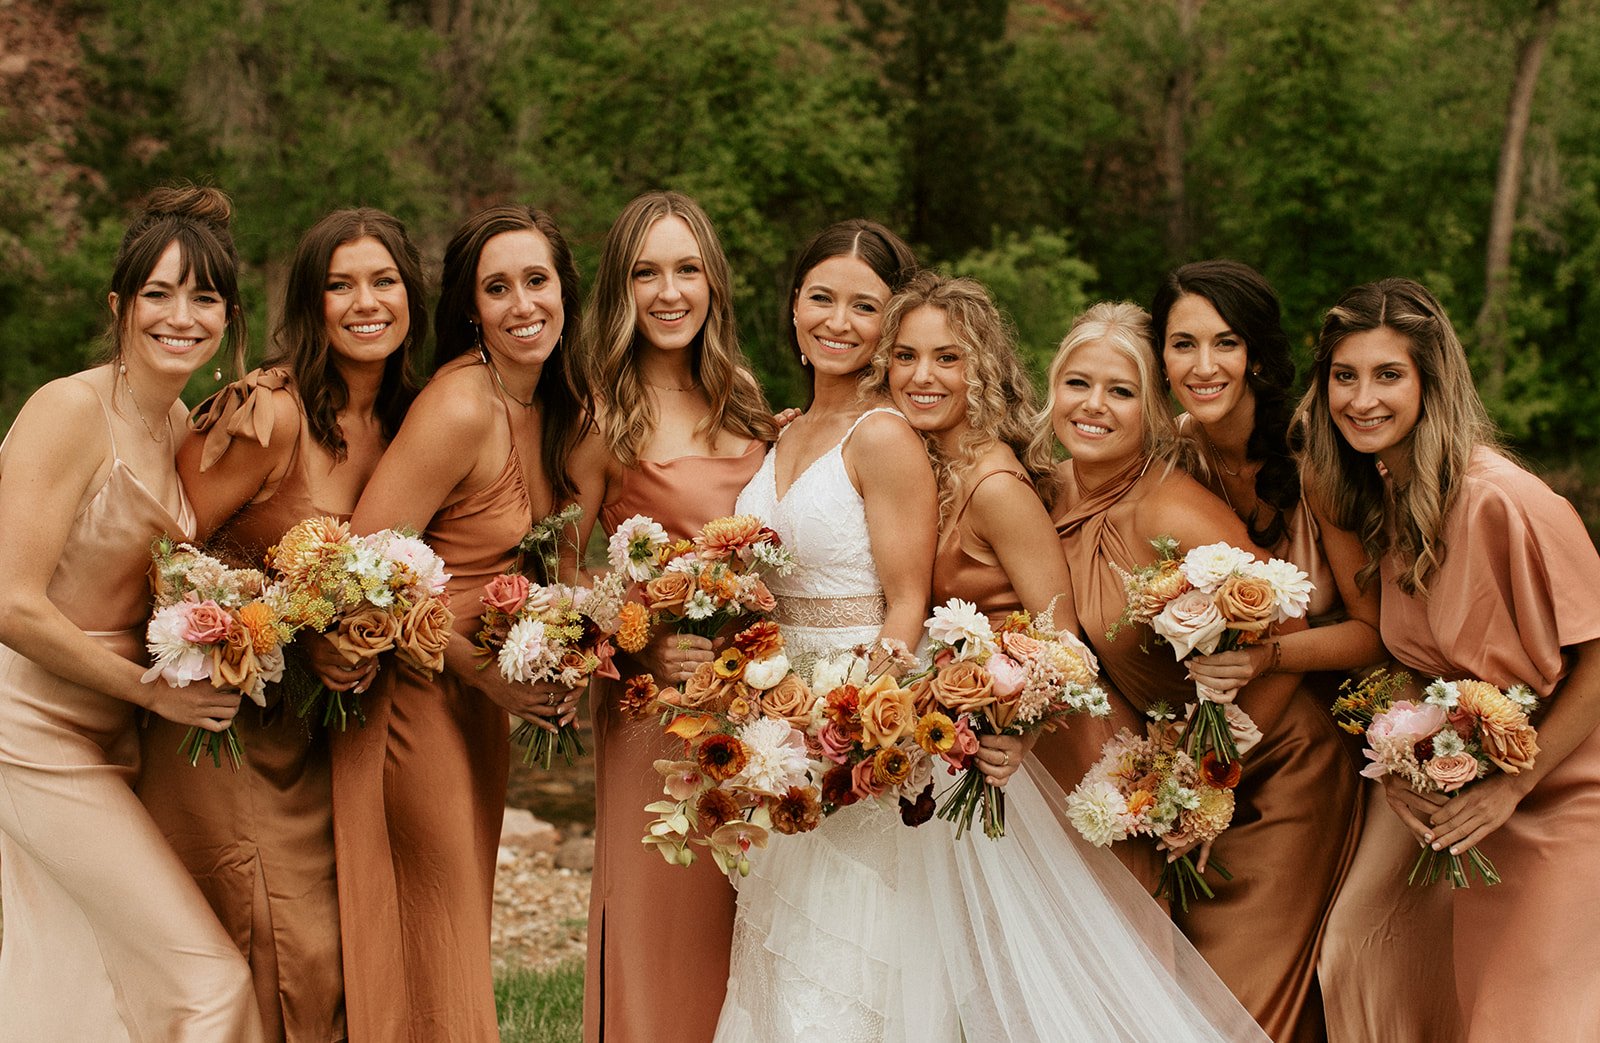  miss-matched bridesmaids rust colored gowns  terracotta color pallet  